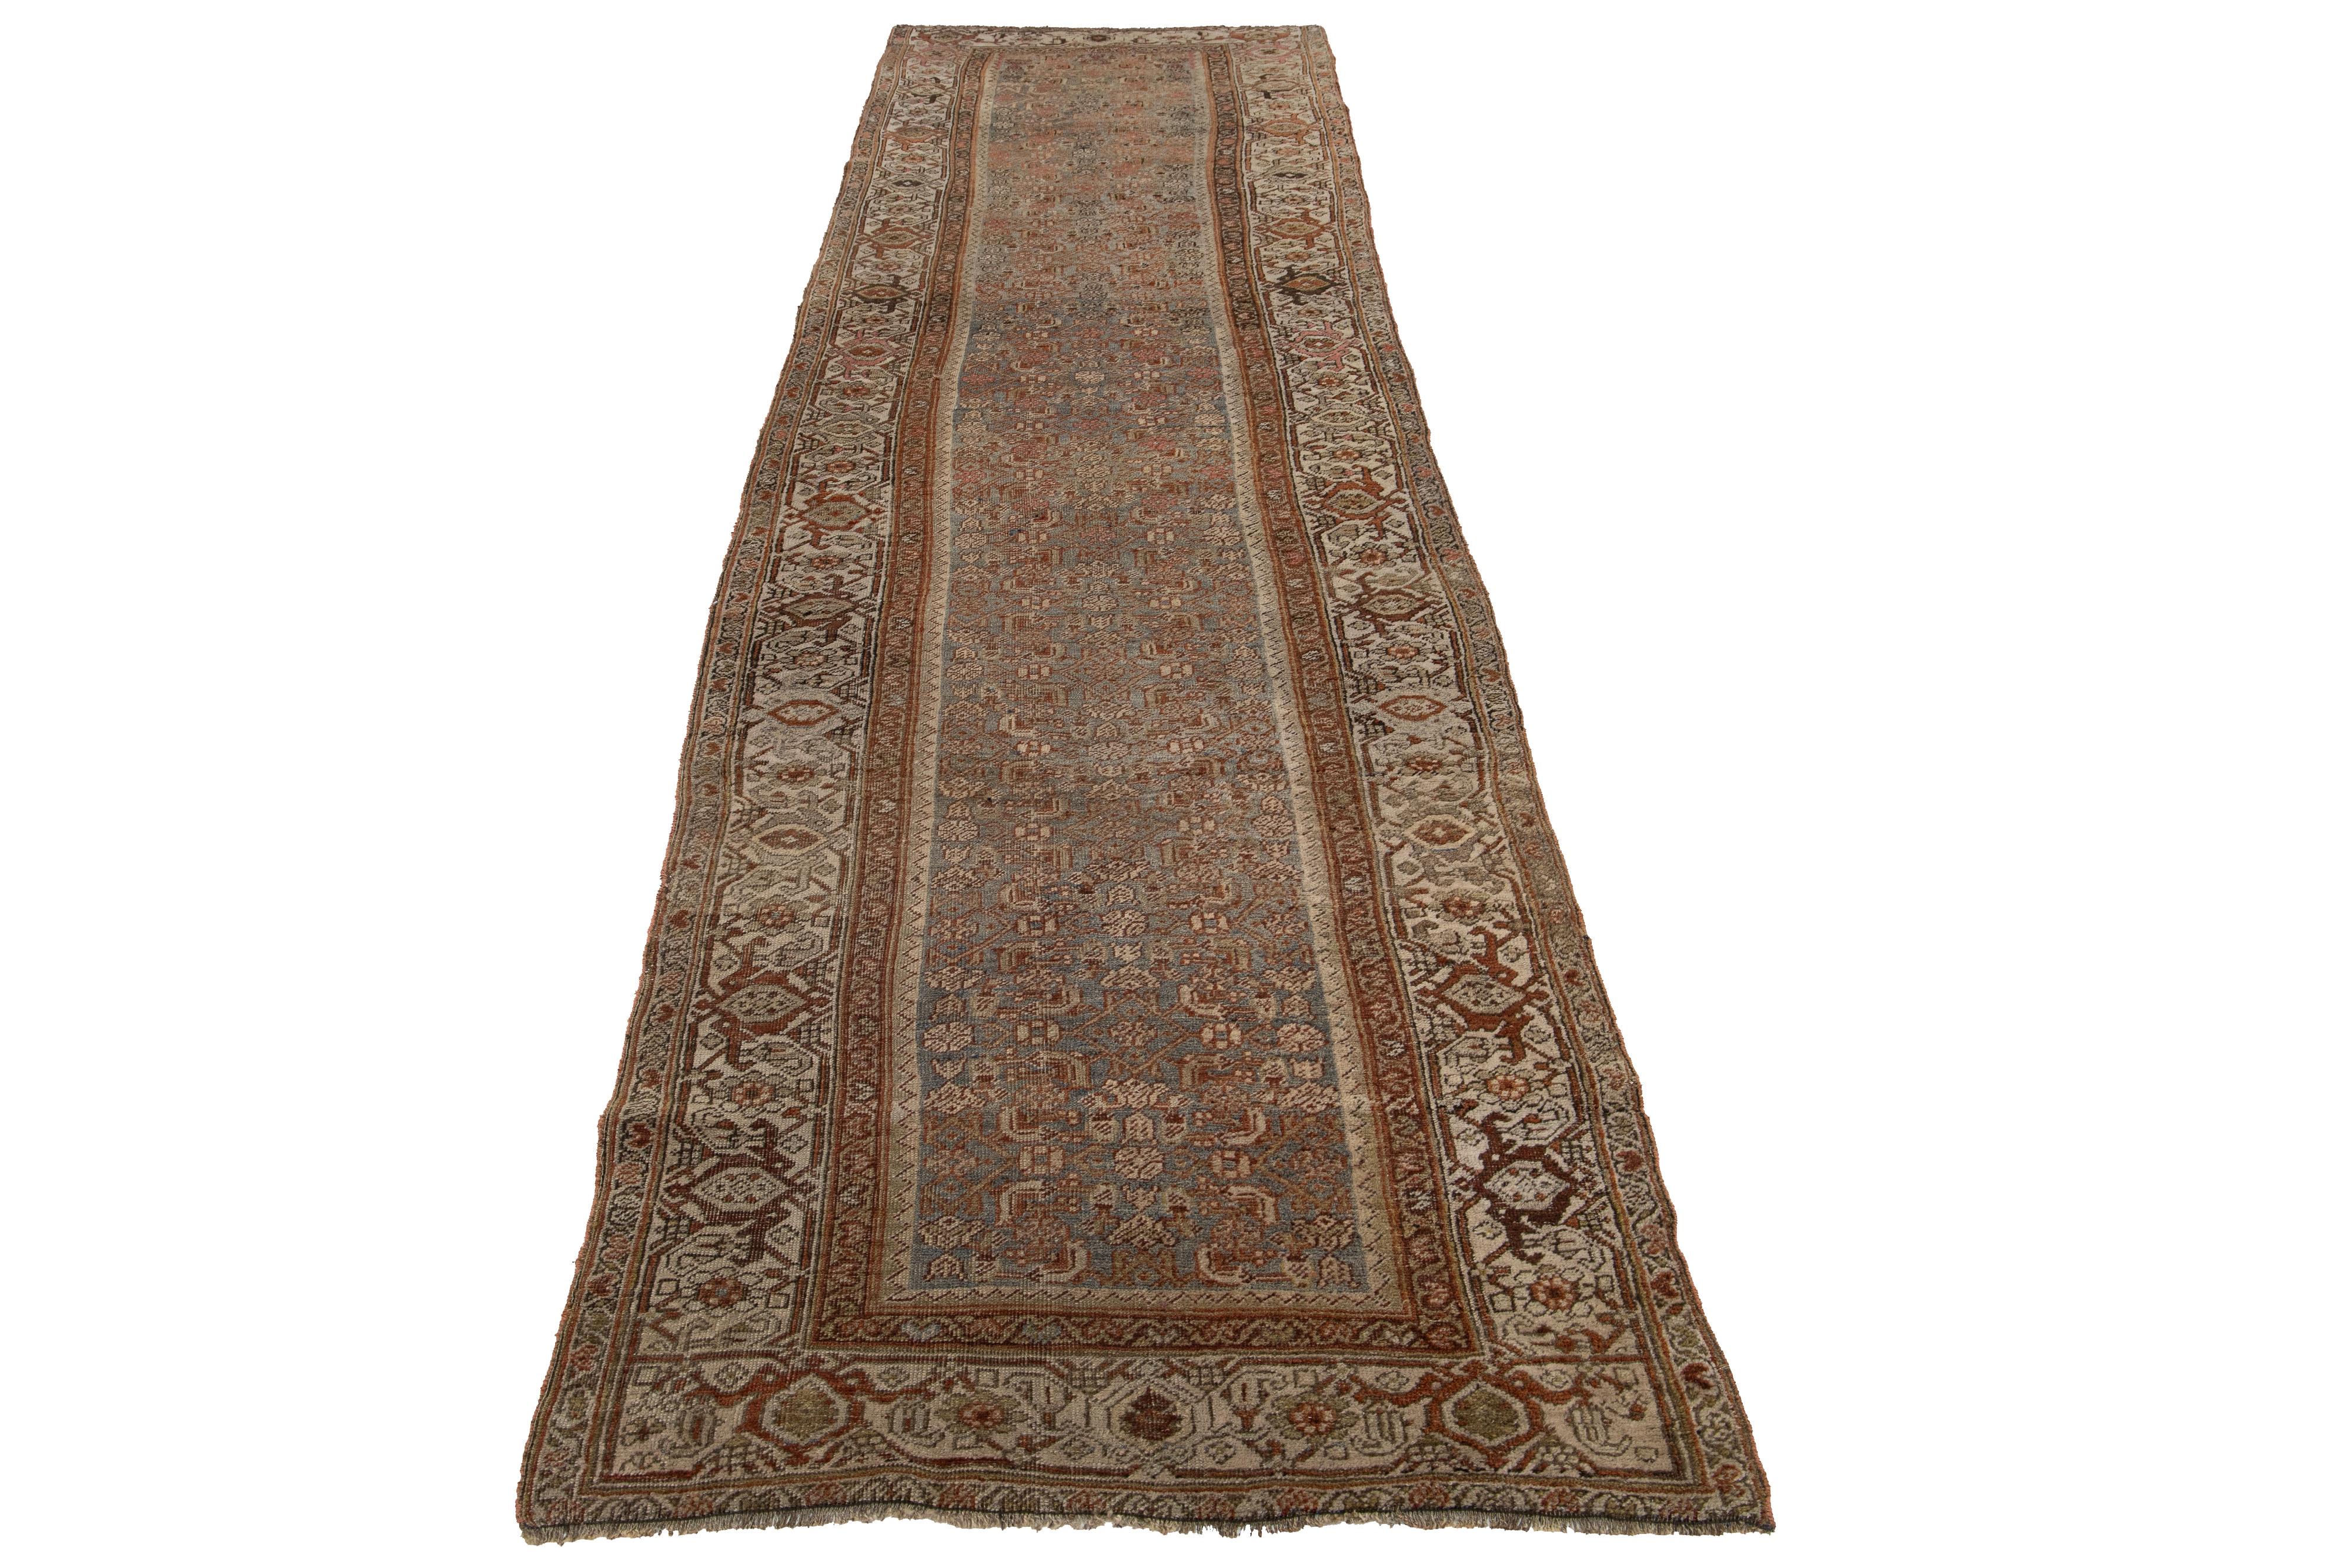 This Persian Bidjar wool rug possesses an antique allure, showcasing impeccable hand-knotted wool in a gray field. The floral pattern is embellished with rust, brown, and pink accents.

This rug measures 3'5